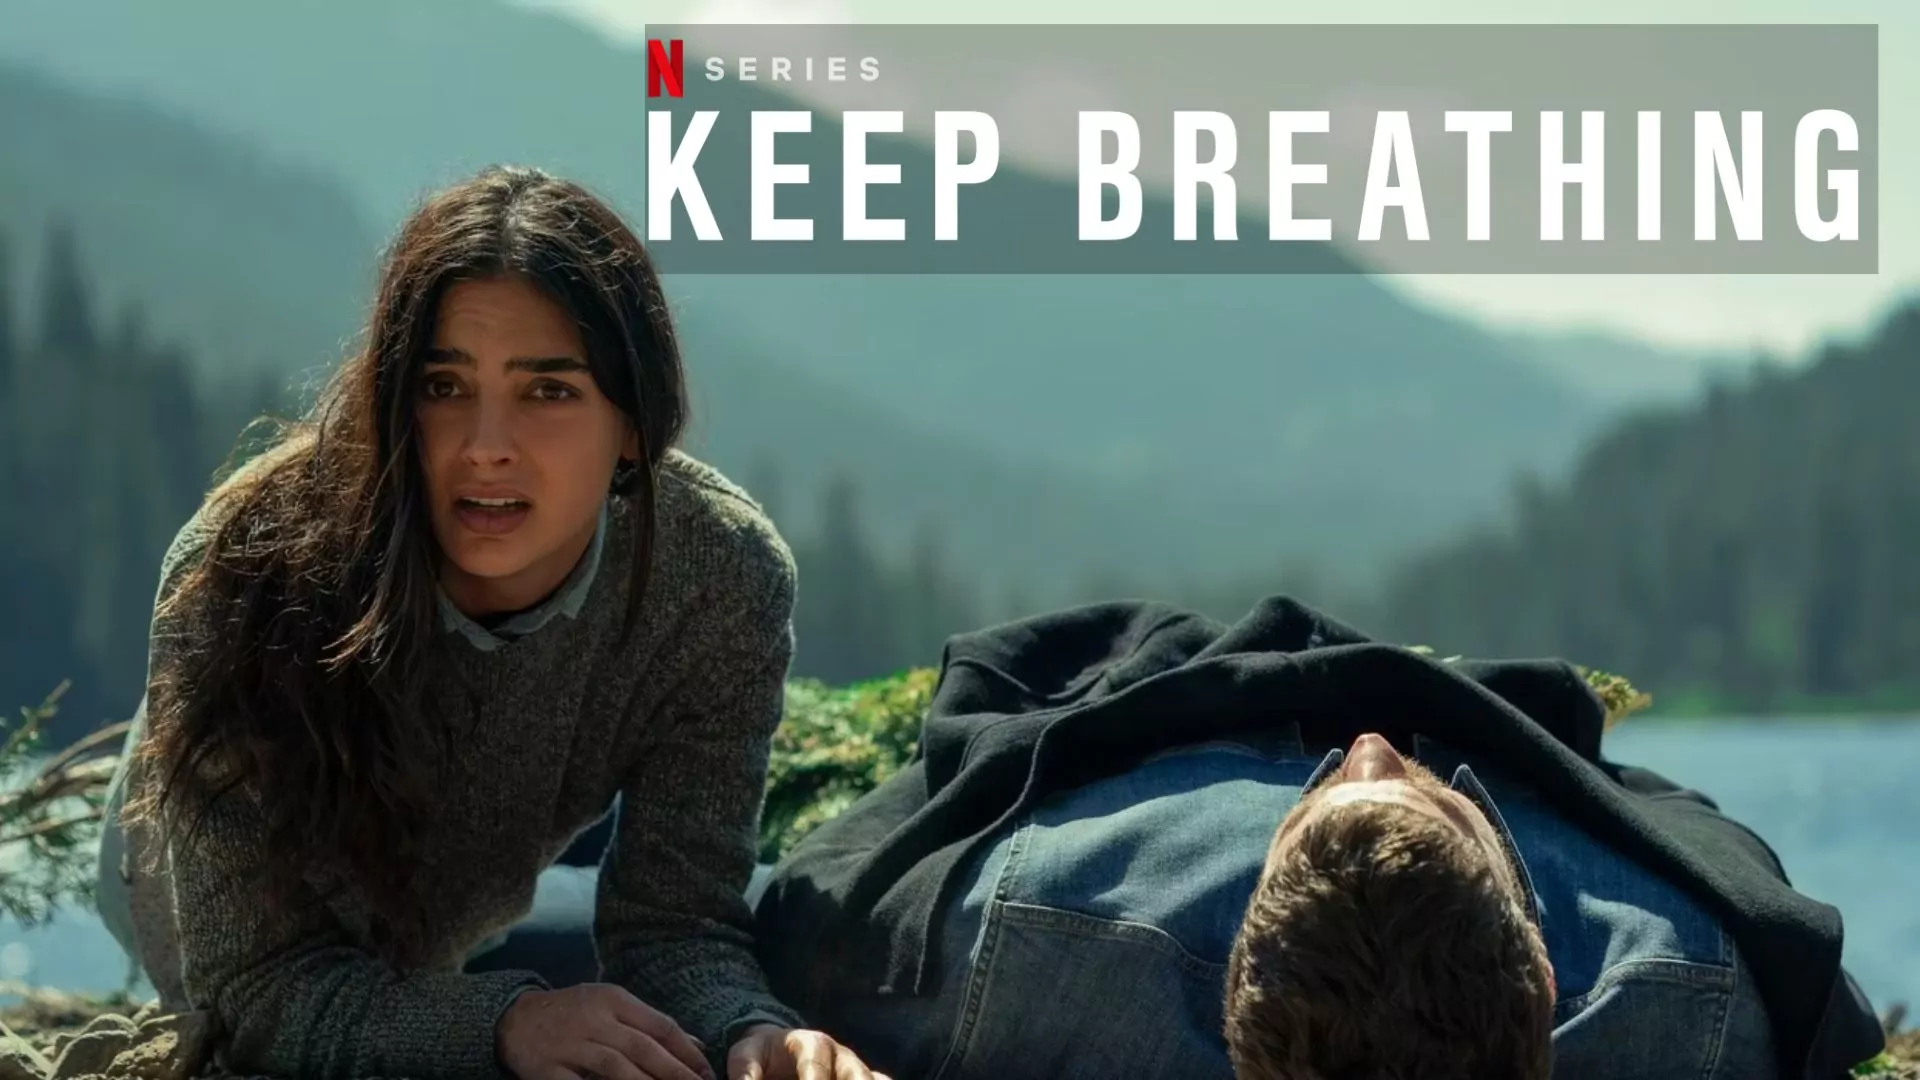 Keep Breathing Parents Guide and Age Rating (2022)